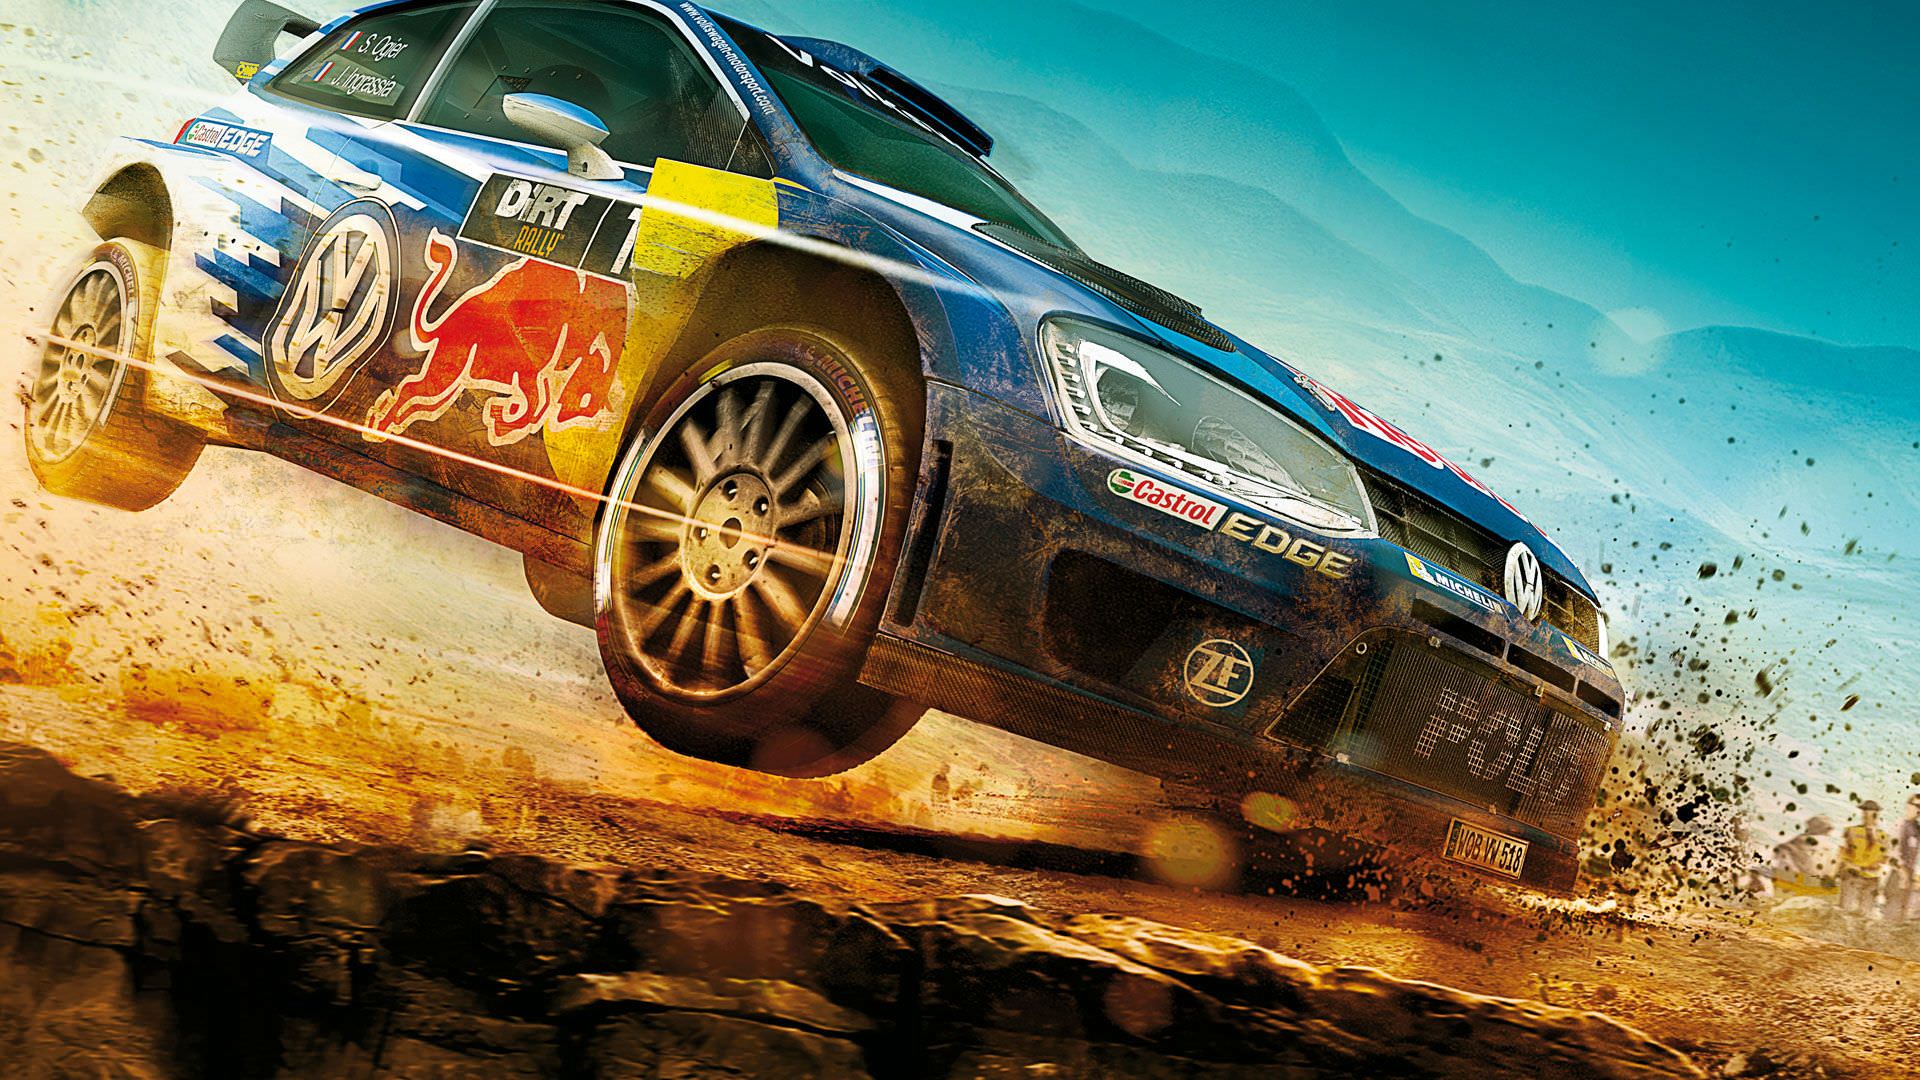 free games epic games store inside celeste dirt rally